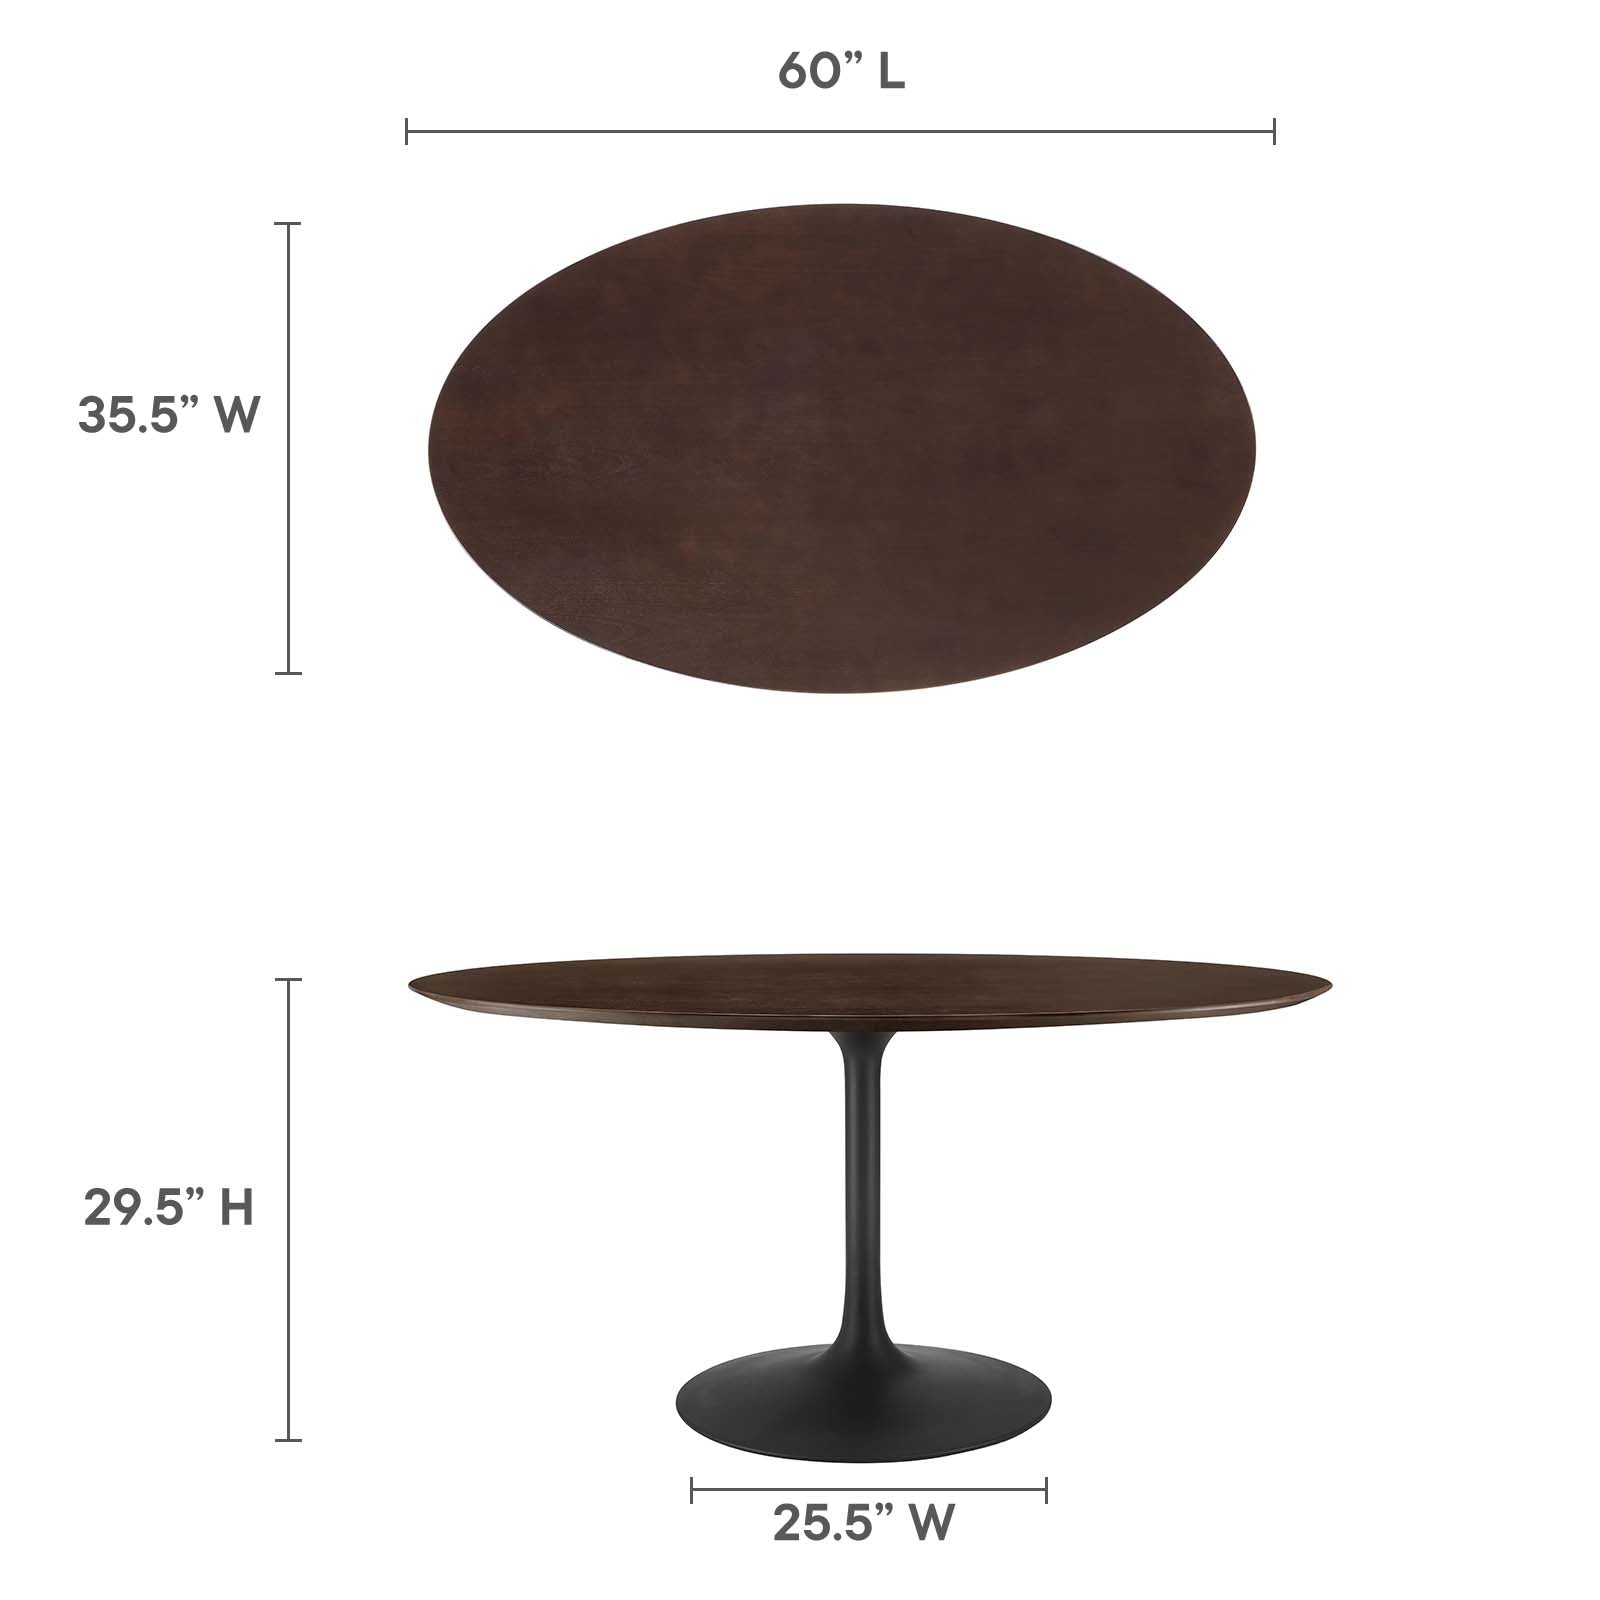 Modway Dining Tables - Lippa 60" Wood Oval Dining Table Black Cherry Walnut